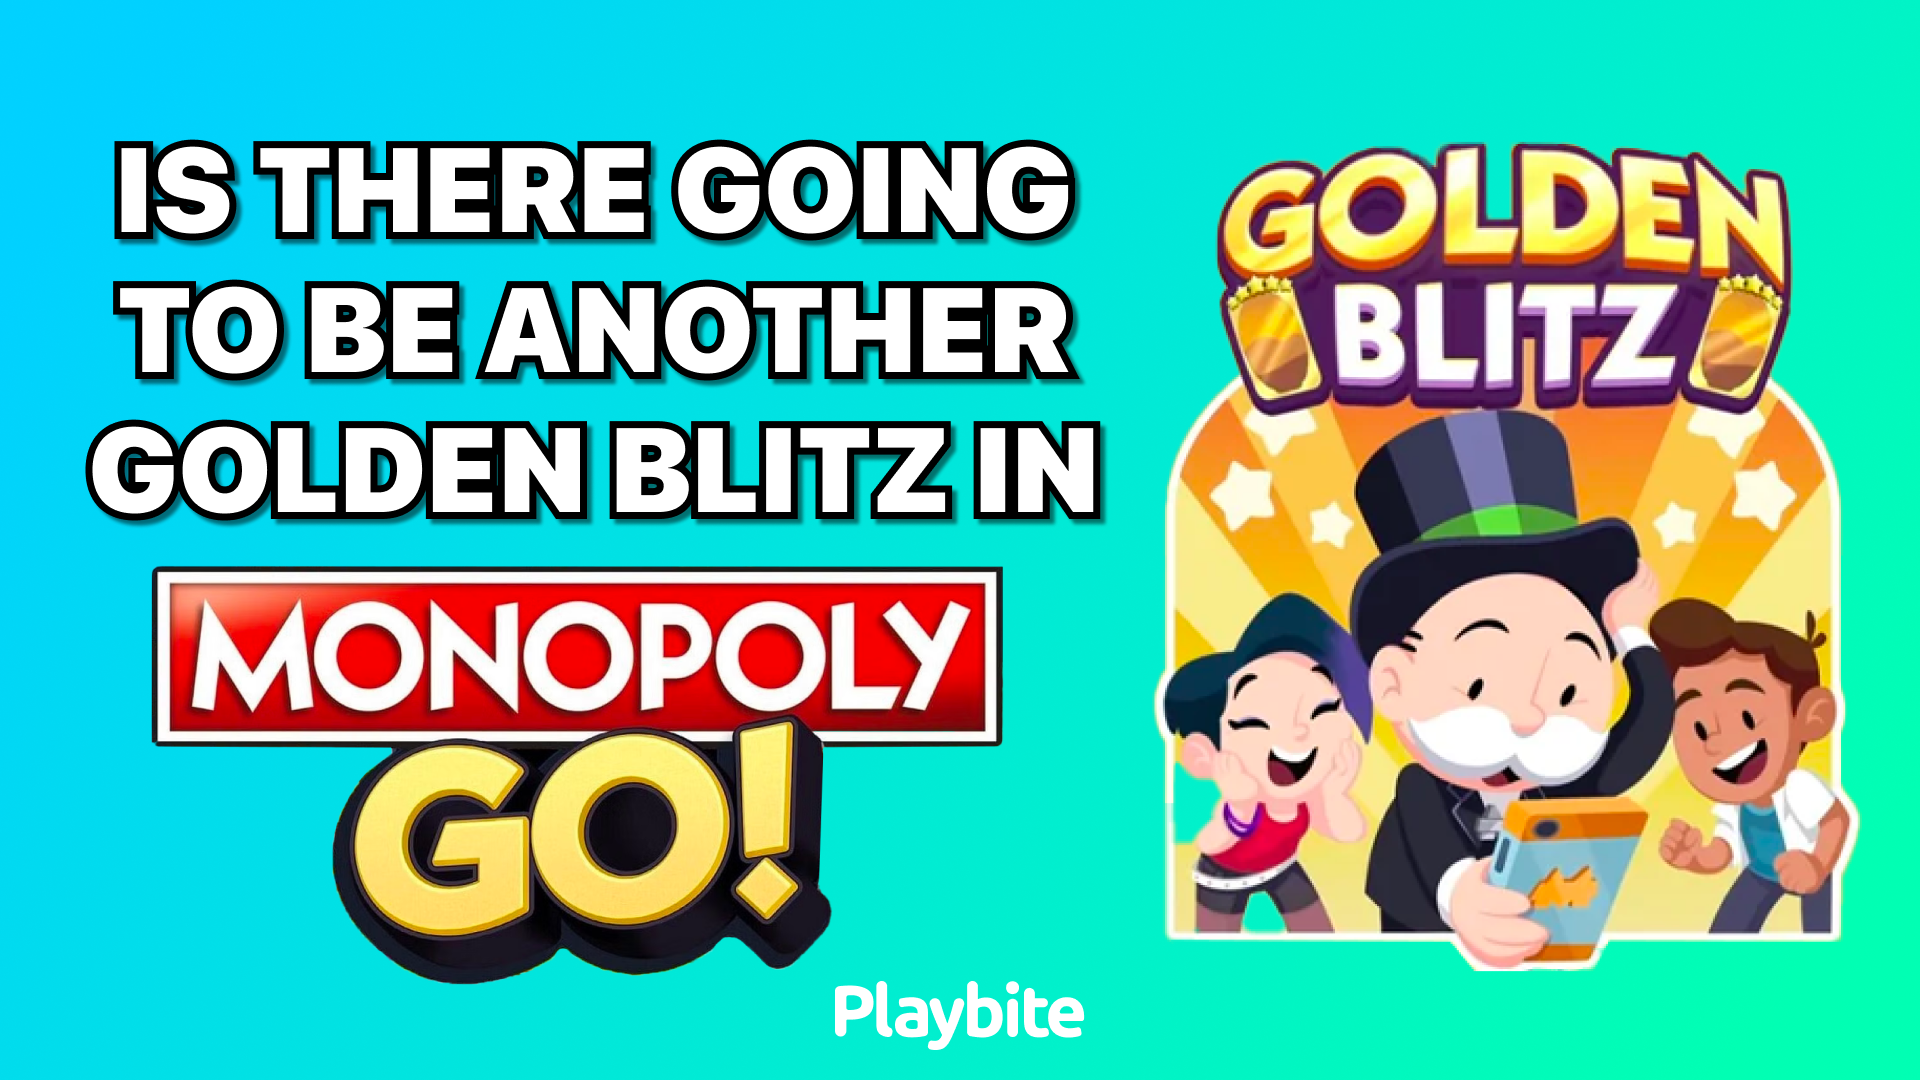 Is There Going to Be Another Golden Blitz in Monopoly Go?